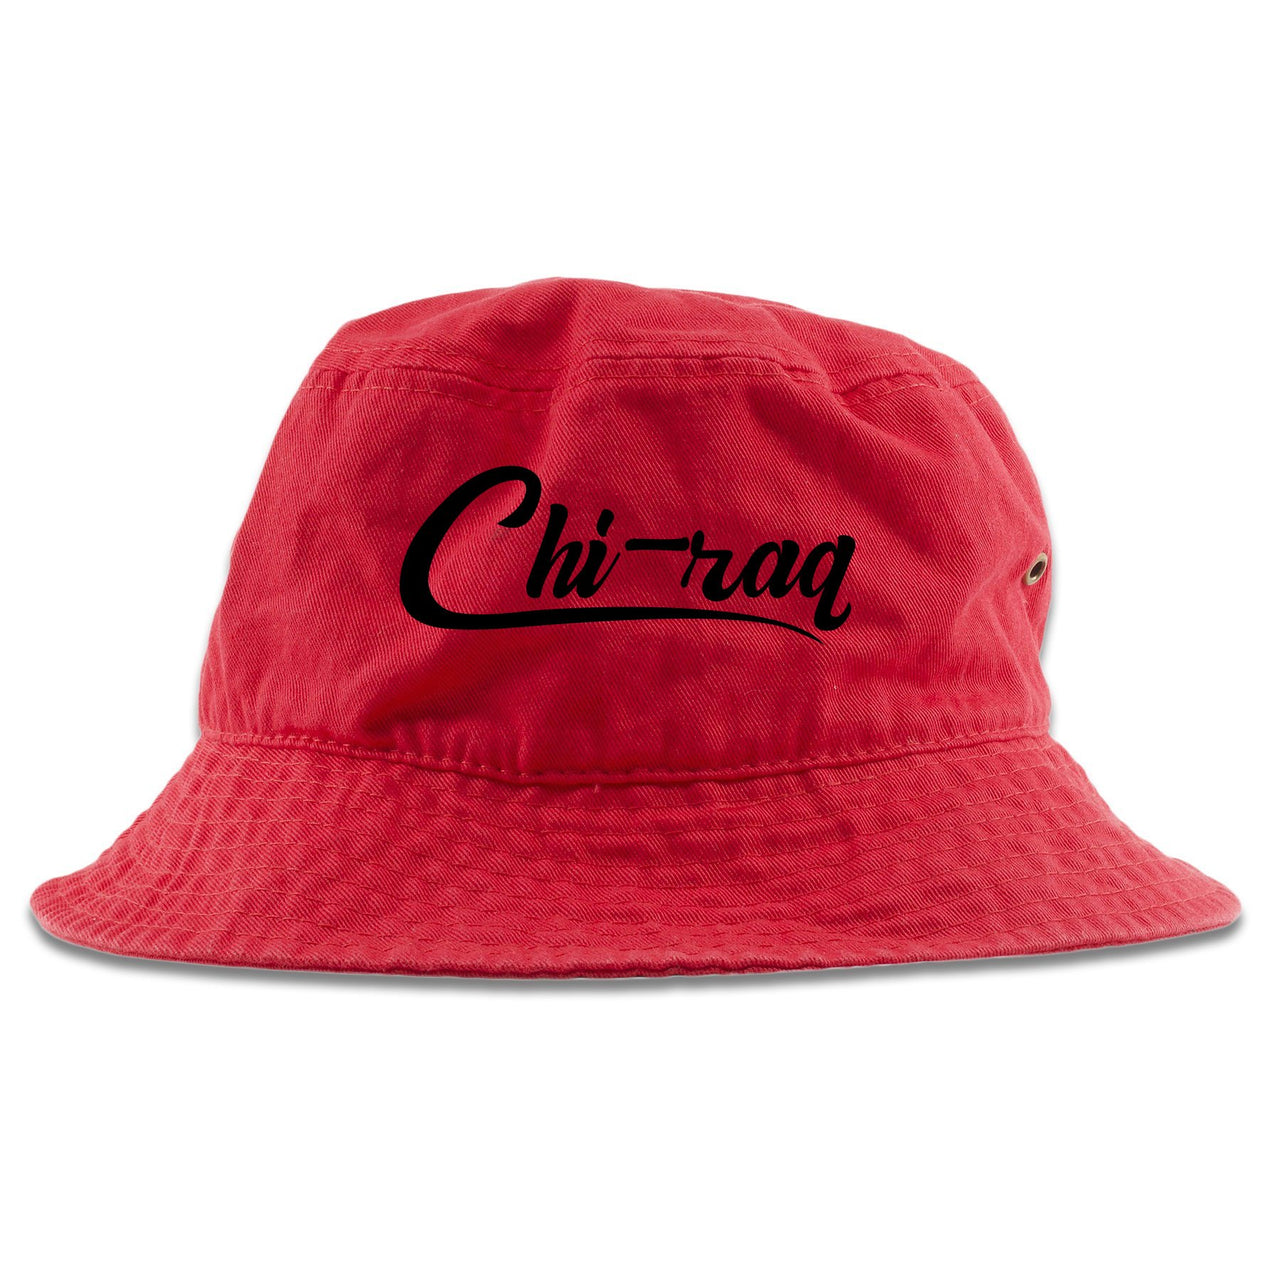 Reflections of a Champion 7s Bucket Hat | Chiraq Script, Red